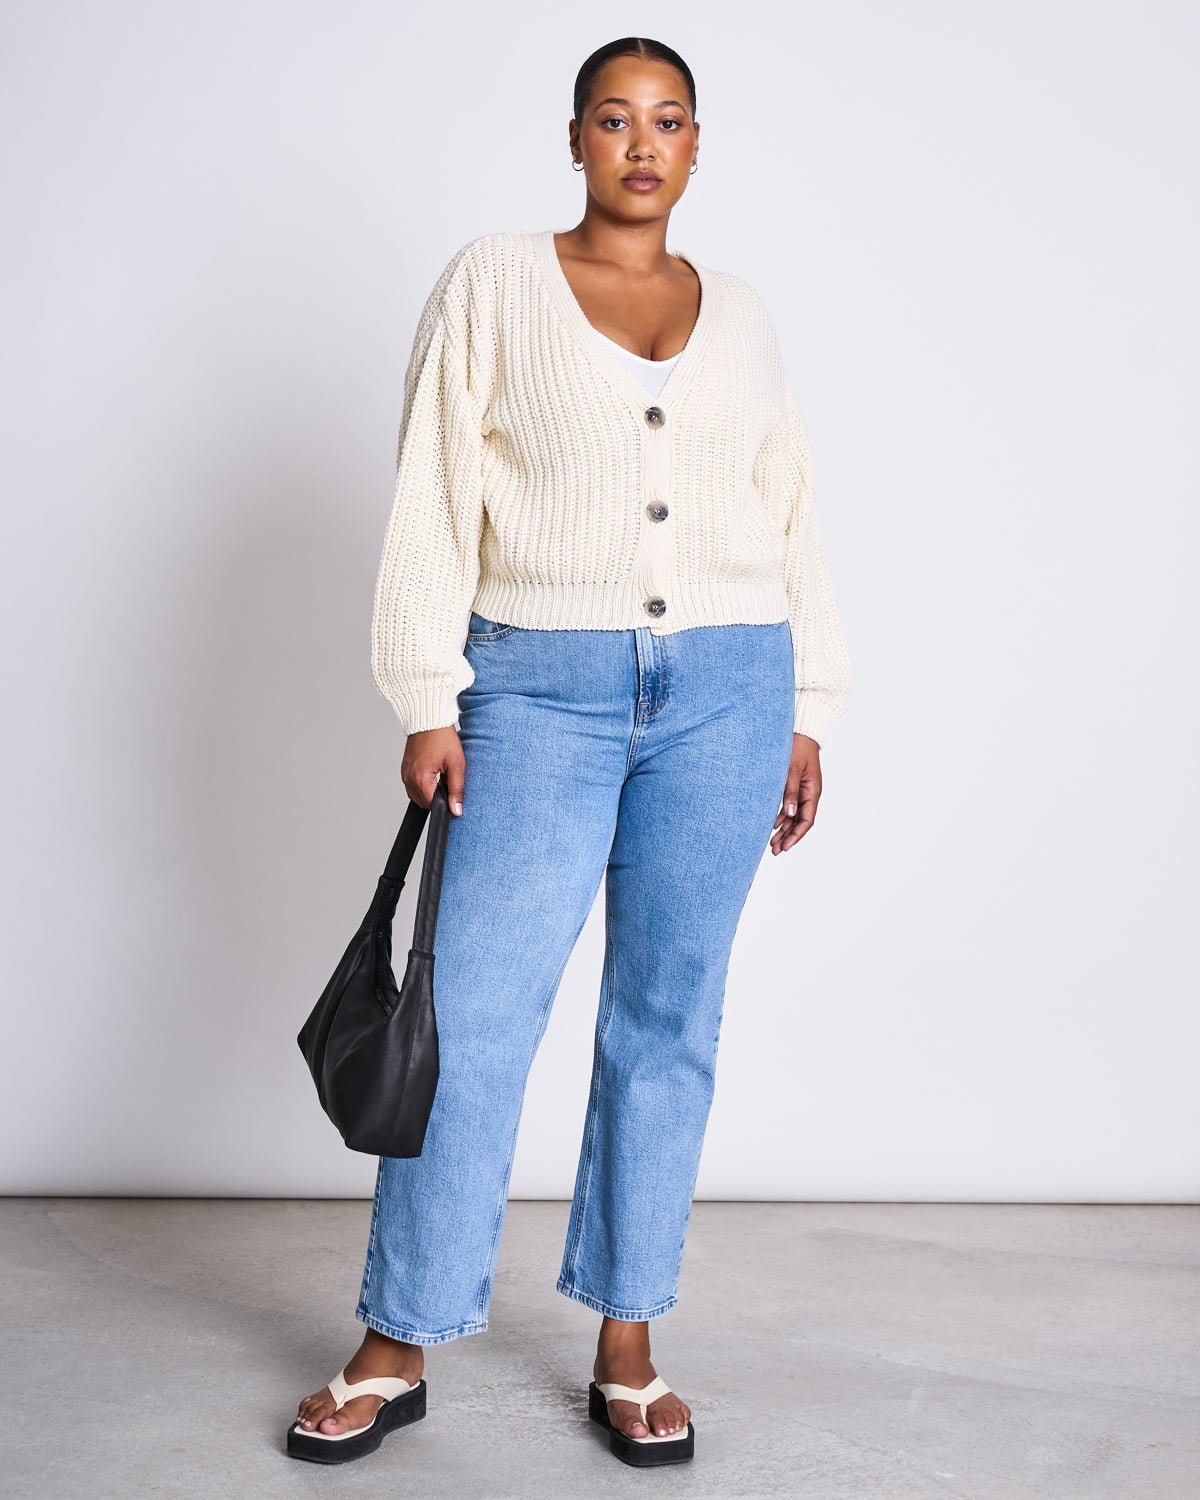 Cardigan Lena - off white - a simple story